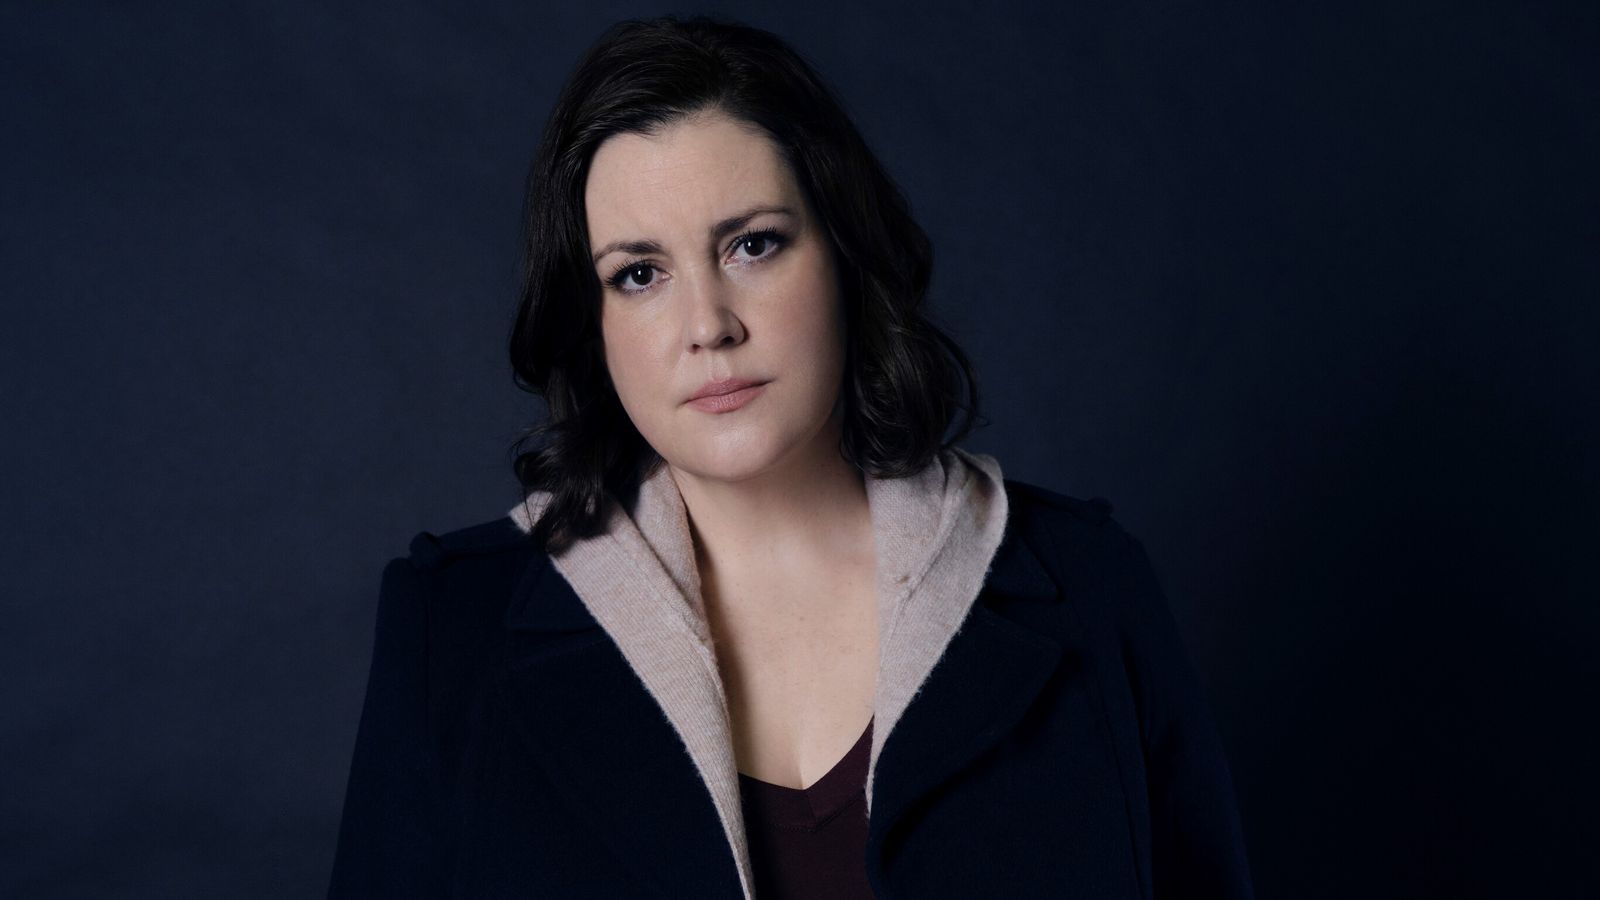 Yellowjackets star Melanie Lynskey on the hit show, why she loves criticism, and her husband's secret The Last Of Us cameo